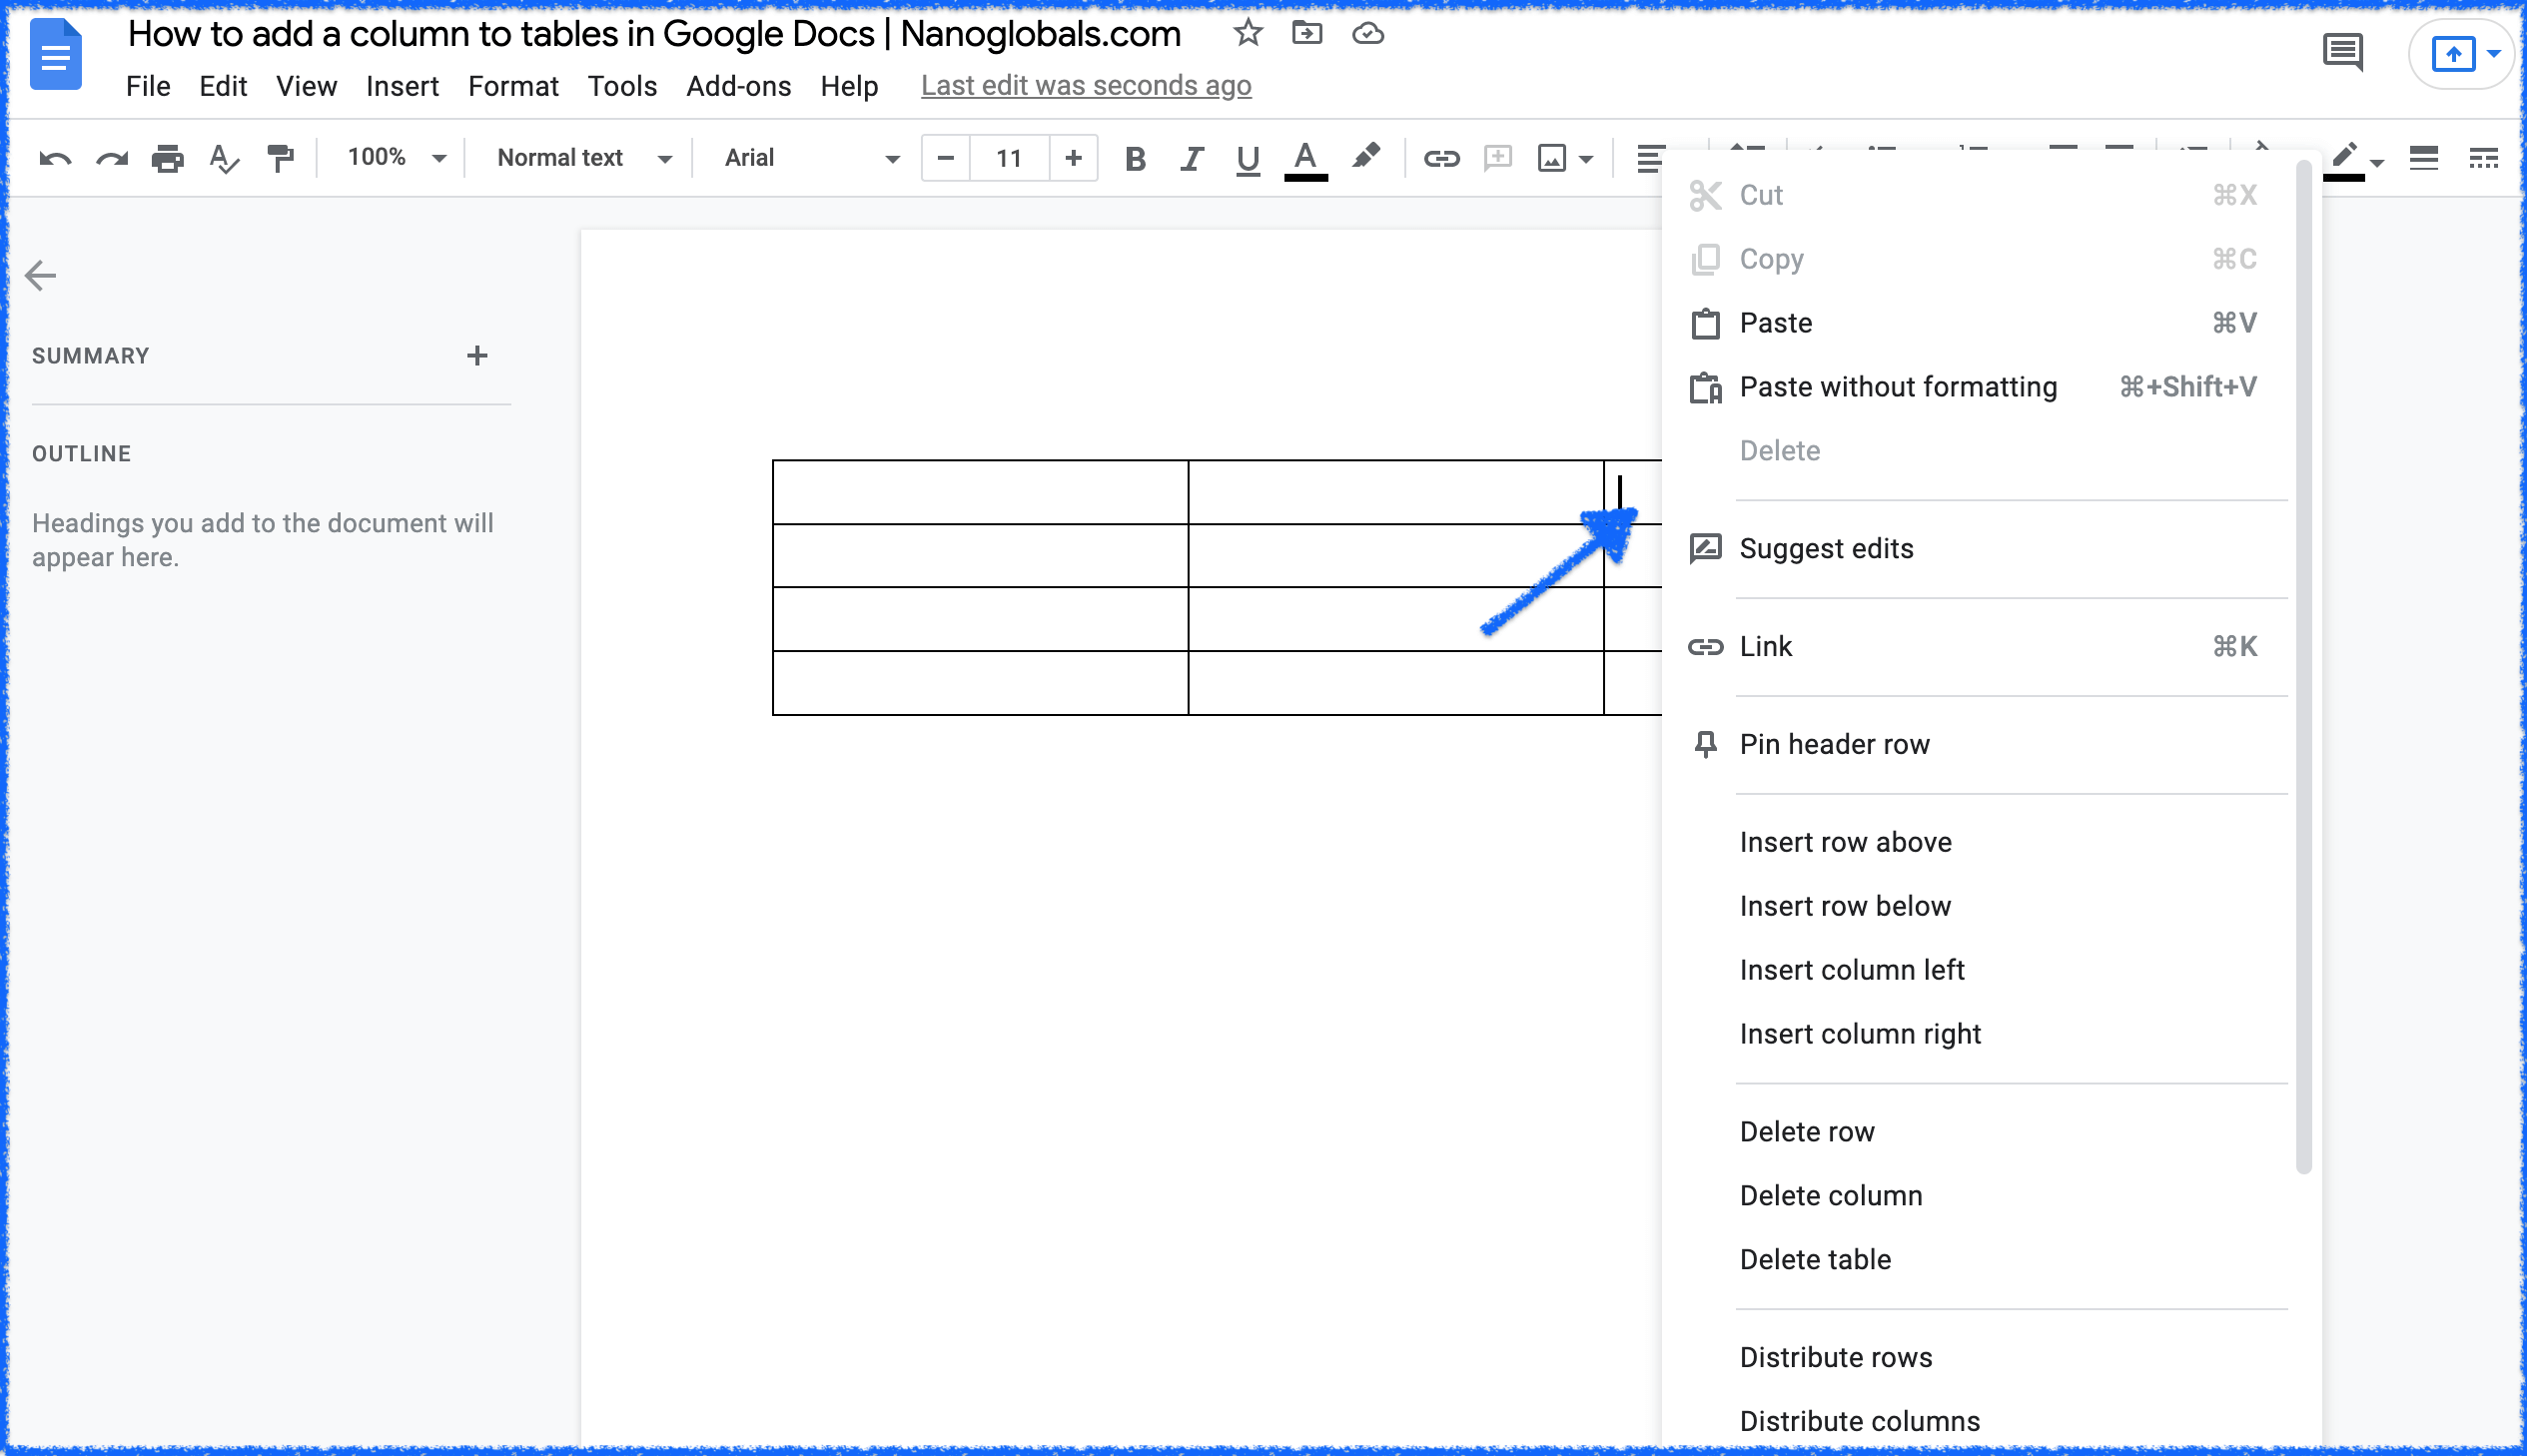 How to add or delete columns in Google Docs tables